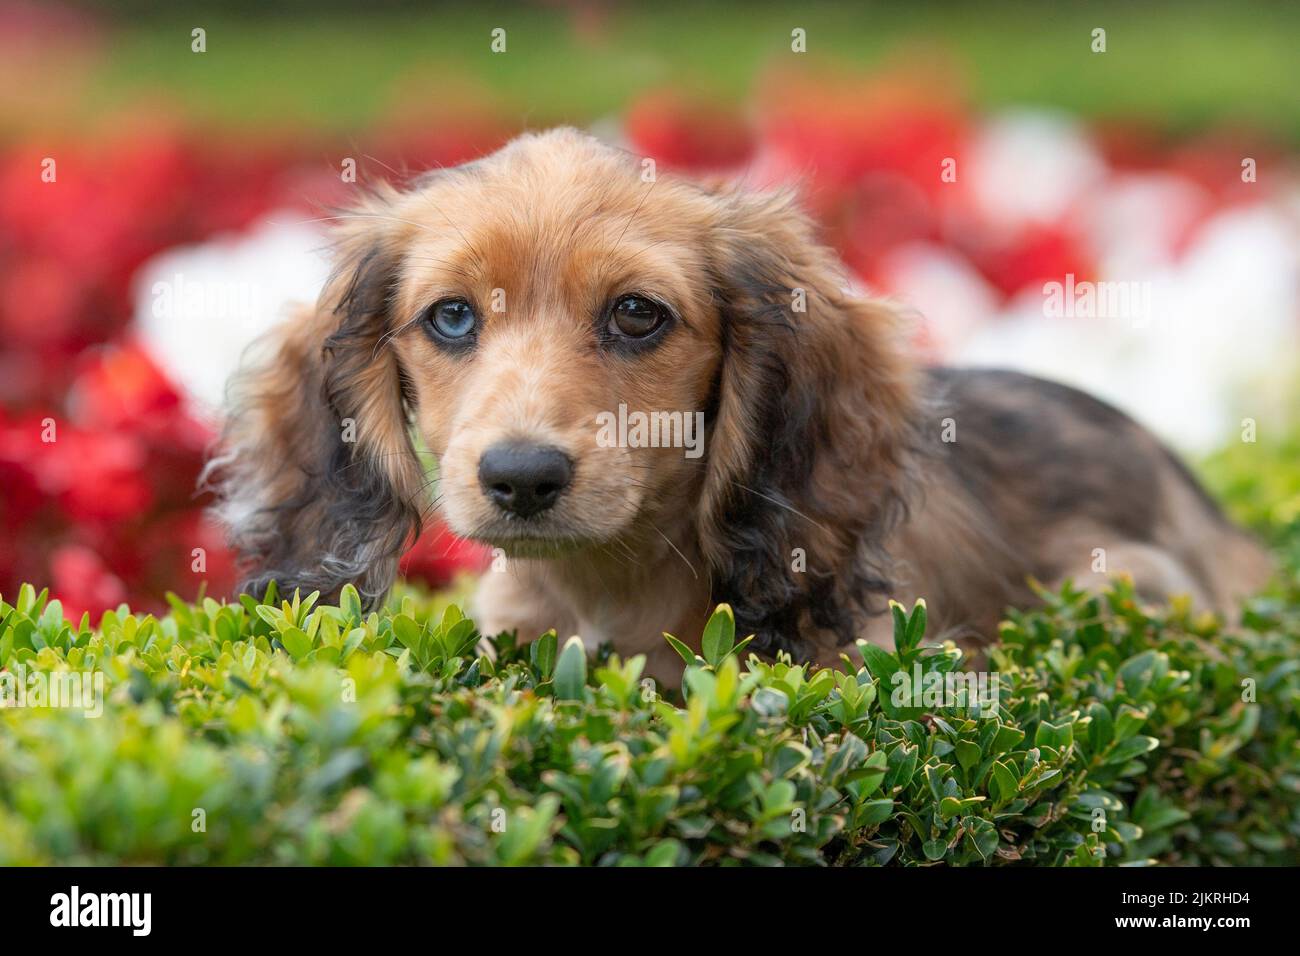 miniature longhaired dachshund puppy Stock Photo